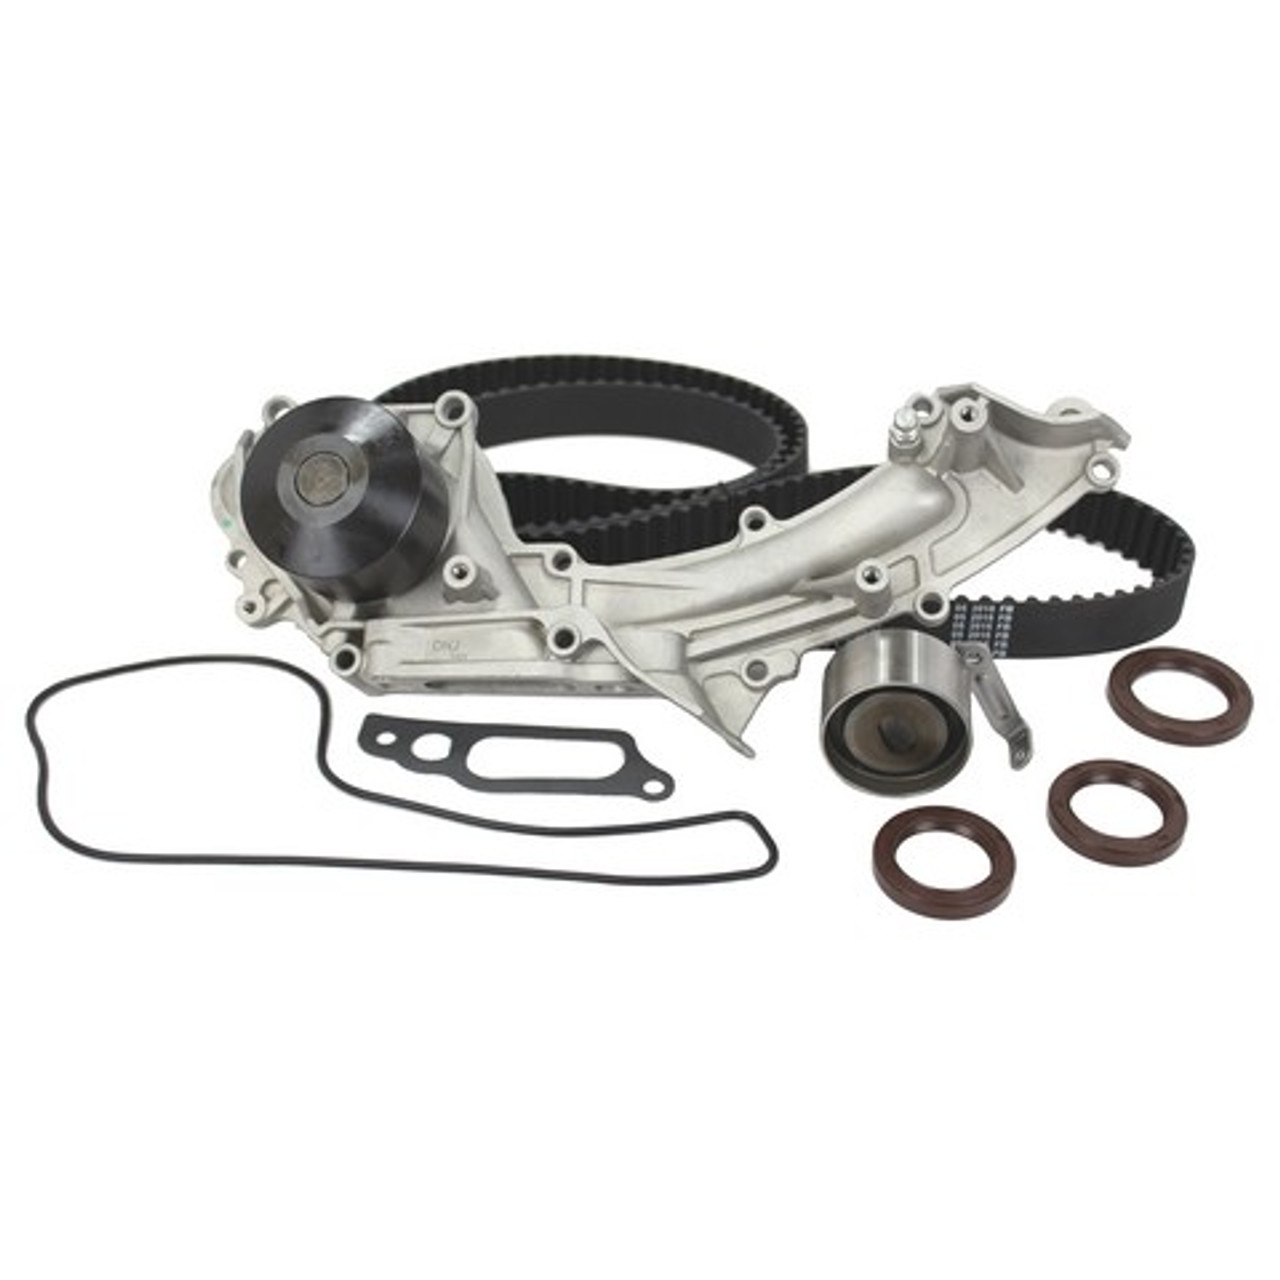 Timing Belt Kit with Water Pump 3.2L 1996 Acura TL - TBK282BWP.1